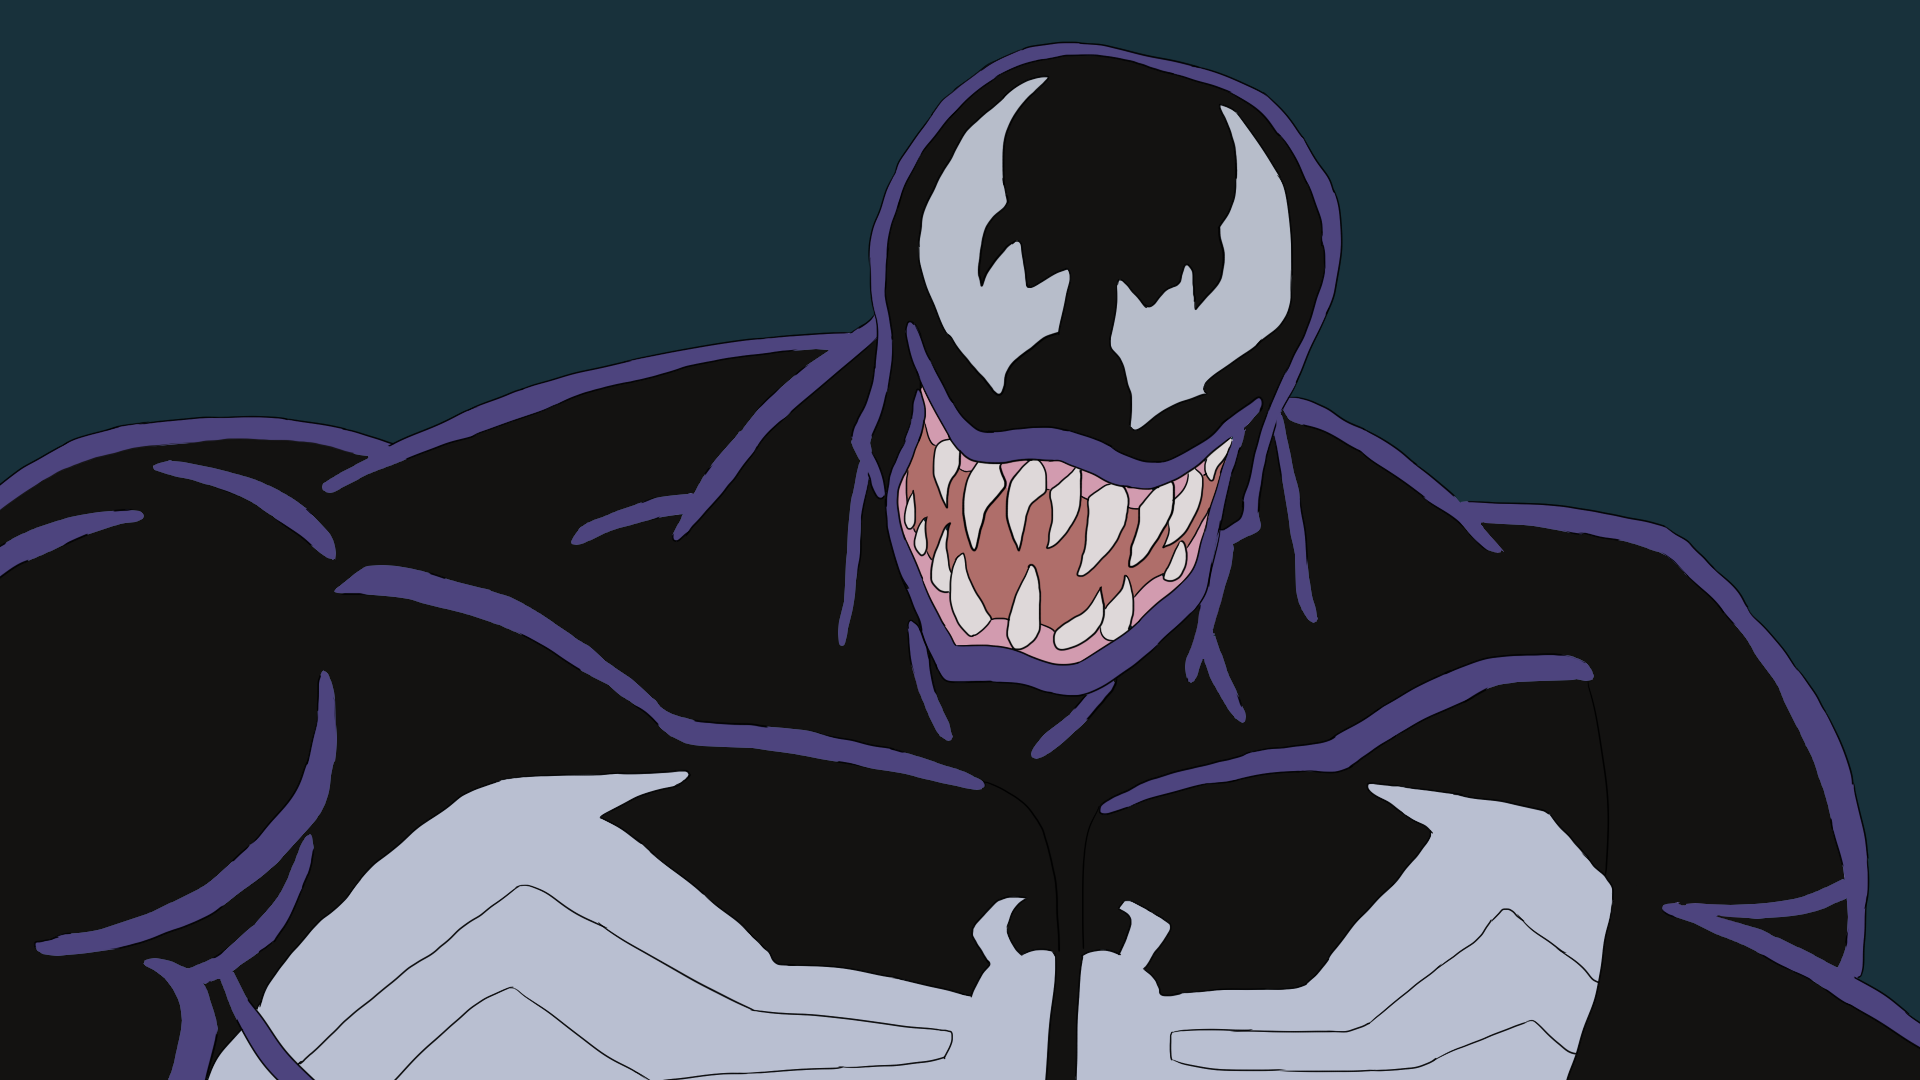 Venom from Spider-man: The Animated Series.

Traced and colored in Paint Tool SAI.
